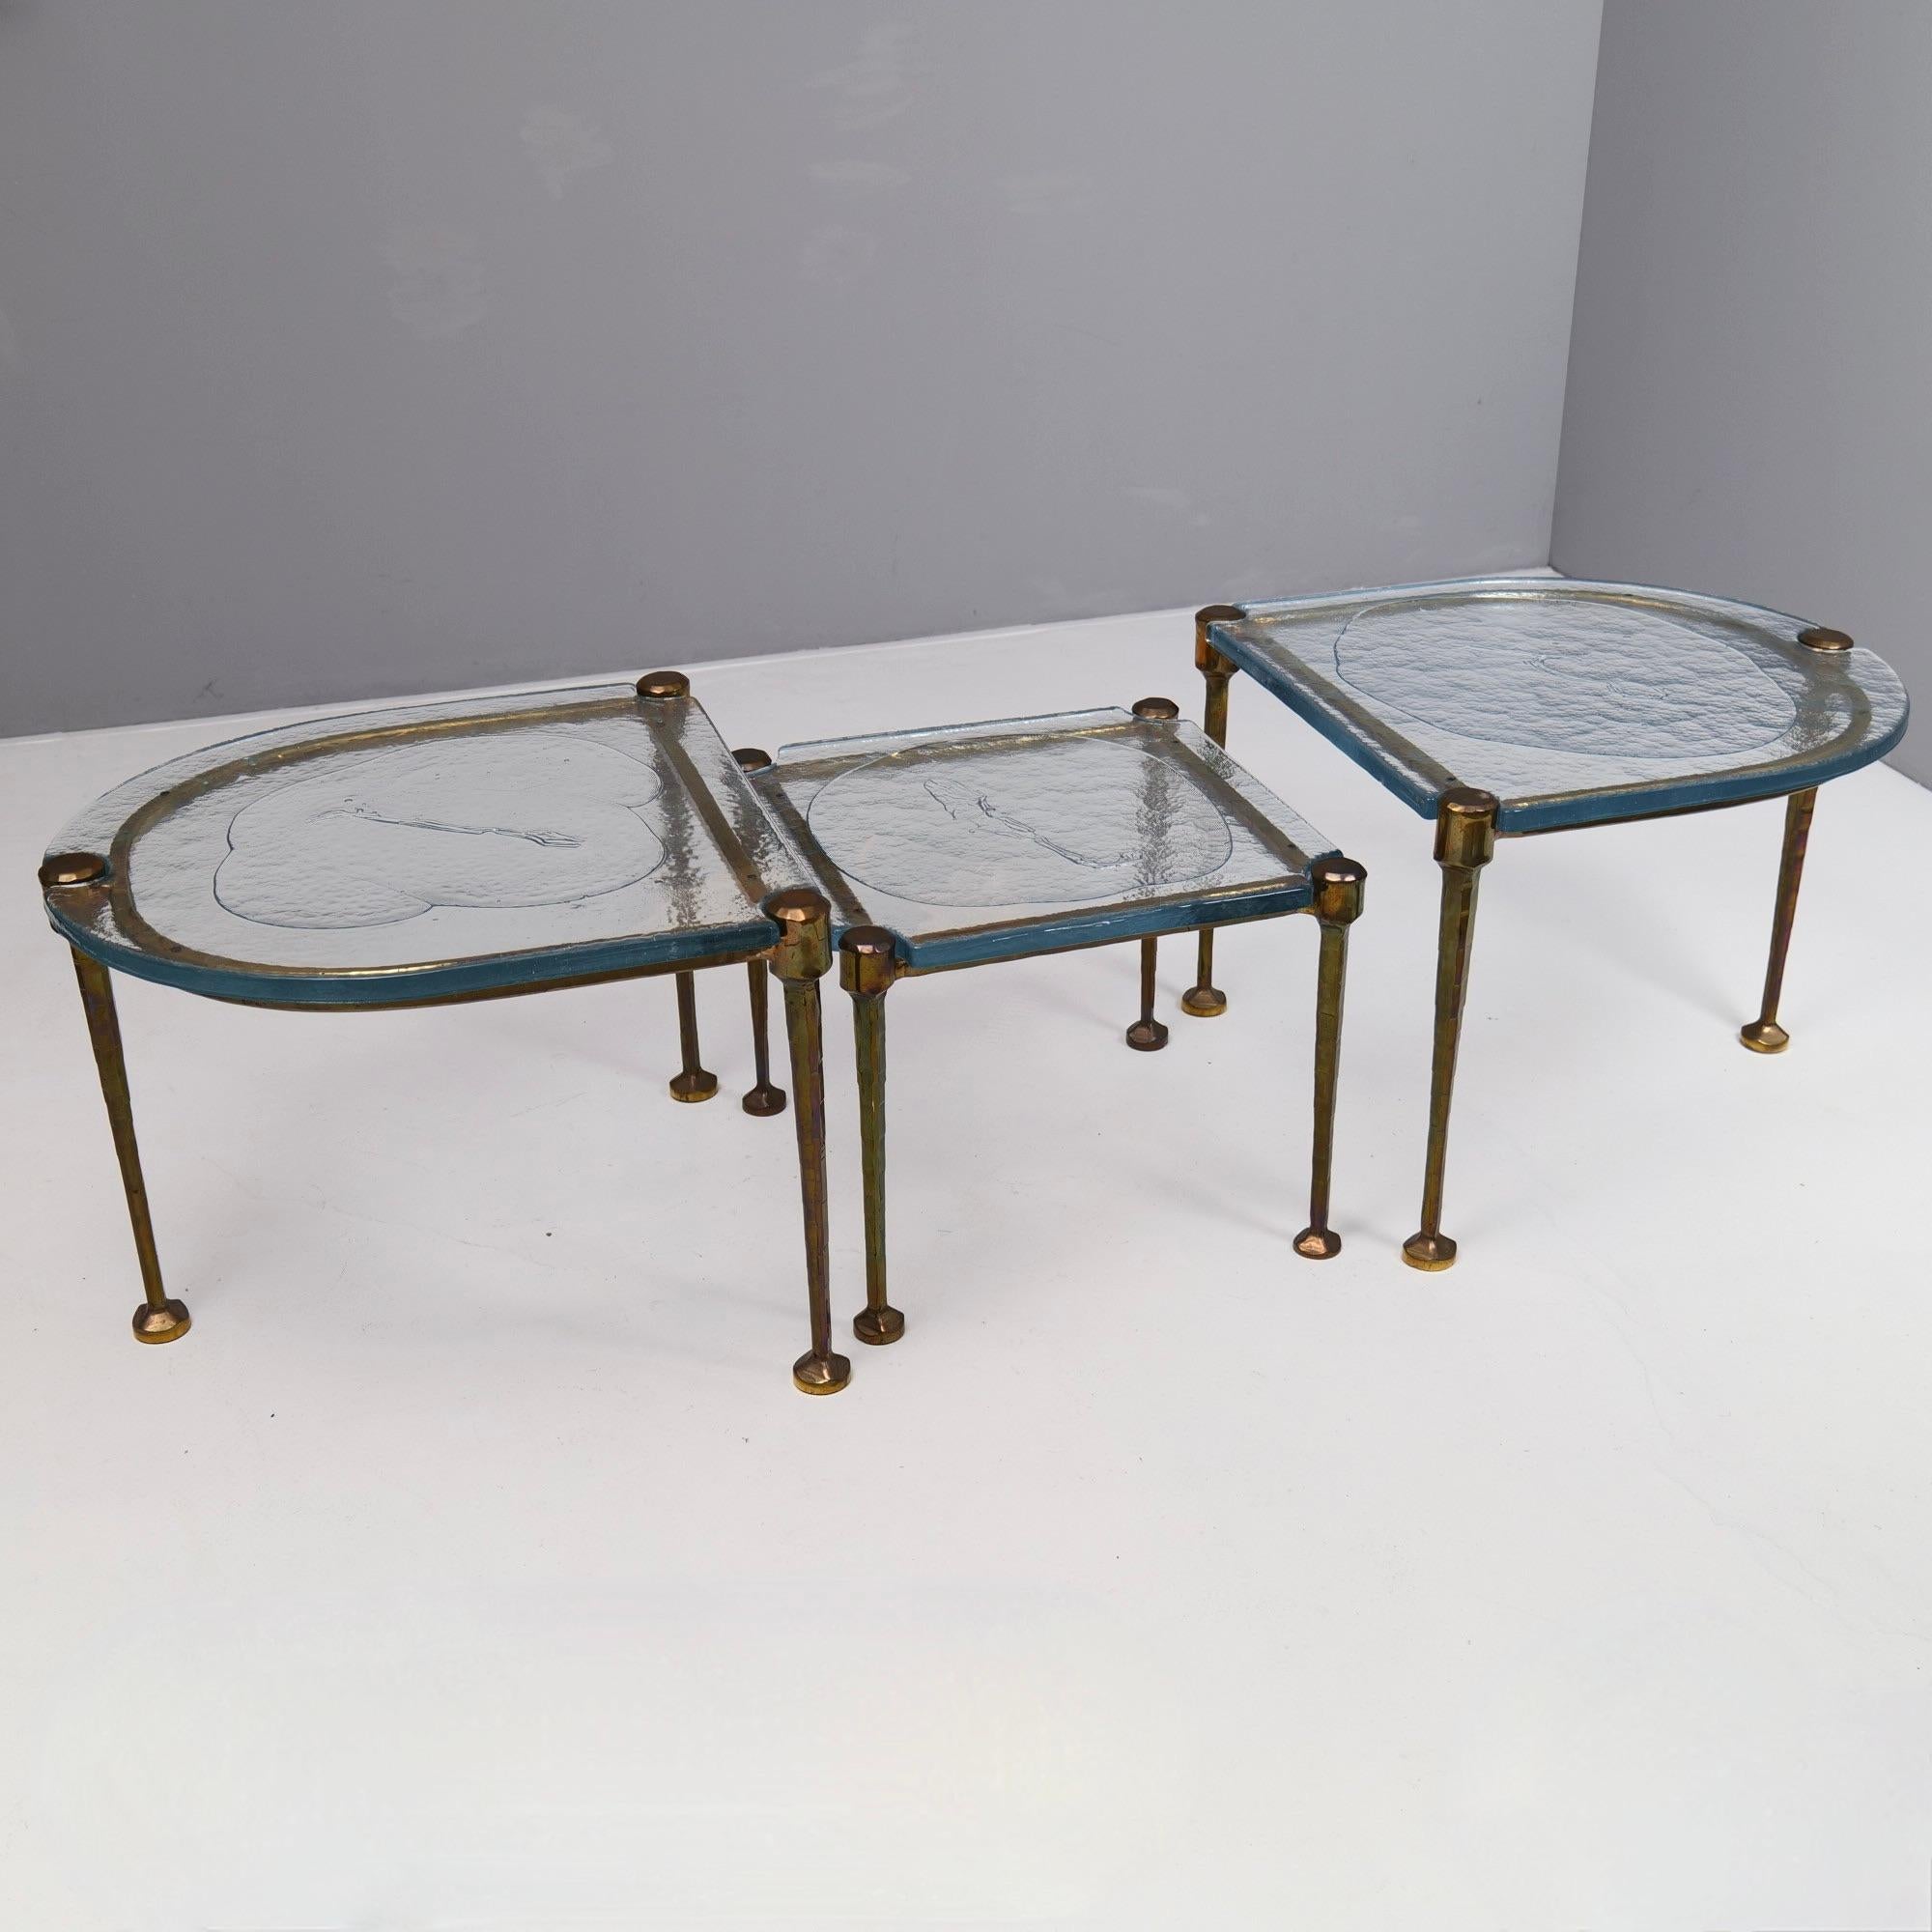 Brutalist forged bronze tables with blue cast glass - 1980s brutalist